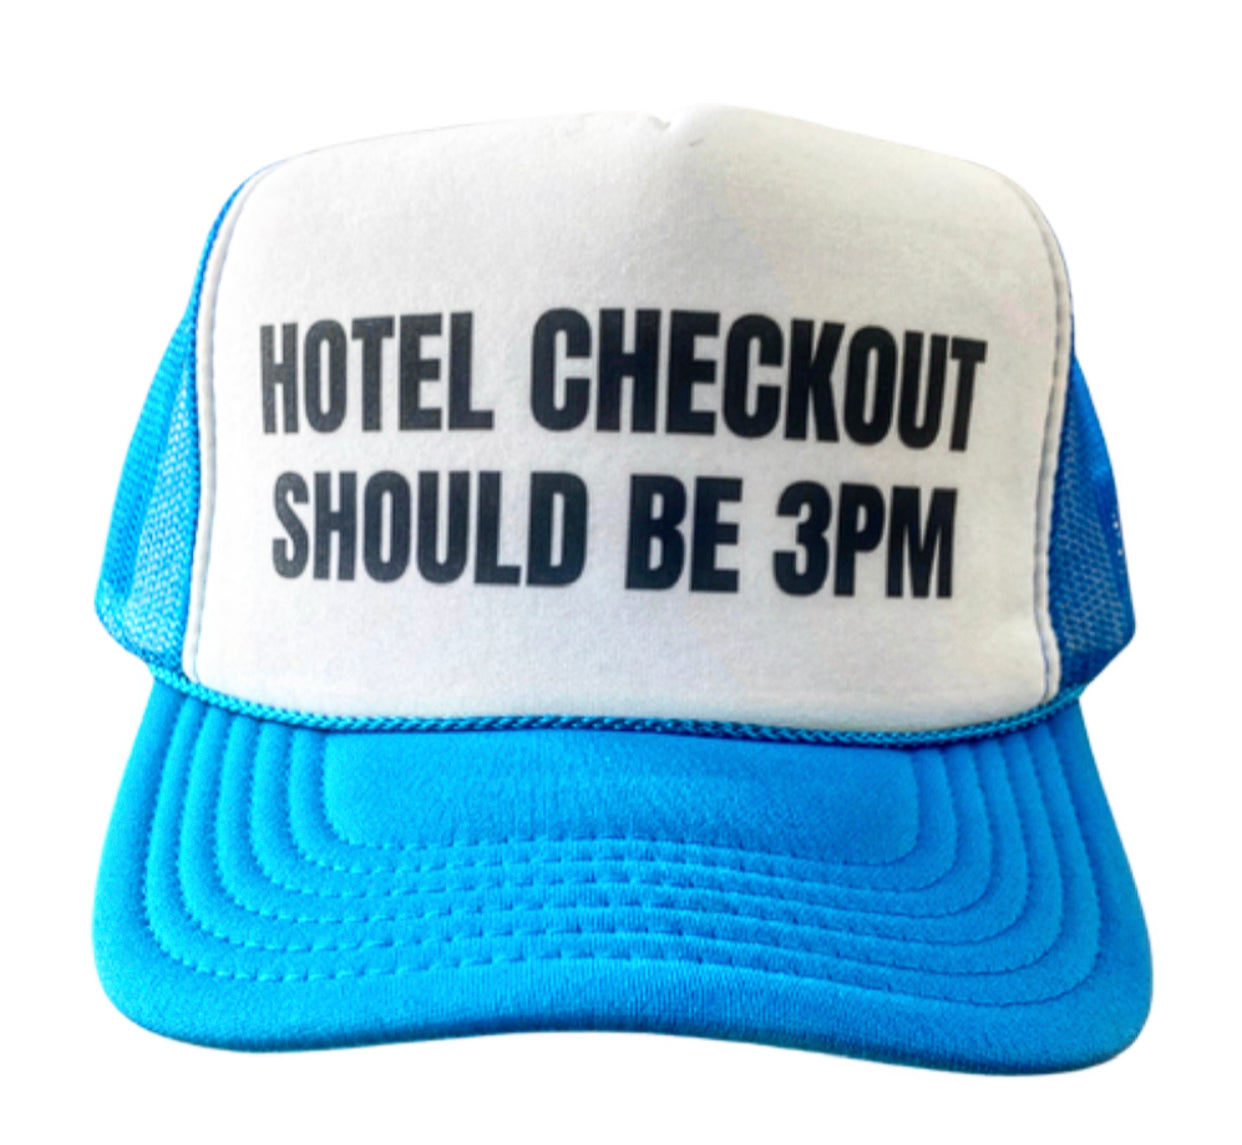 Hotel Checkout Should Be 3pm Trucker Hat